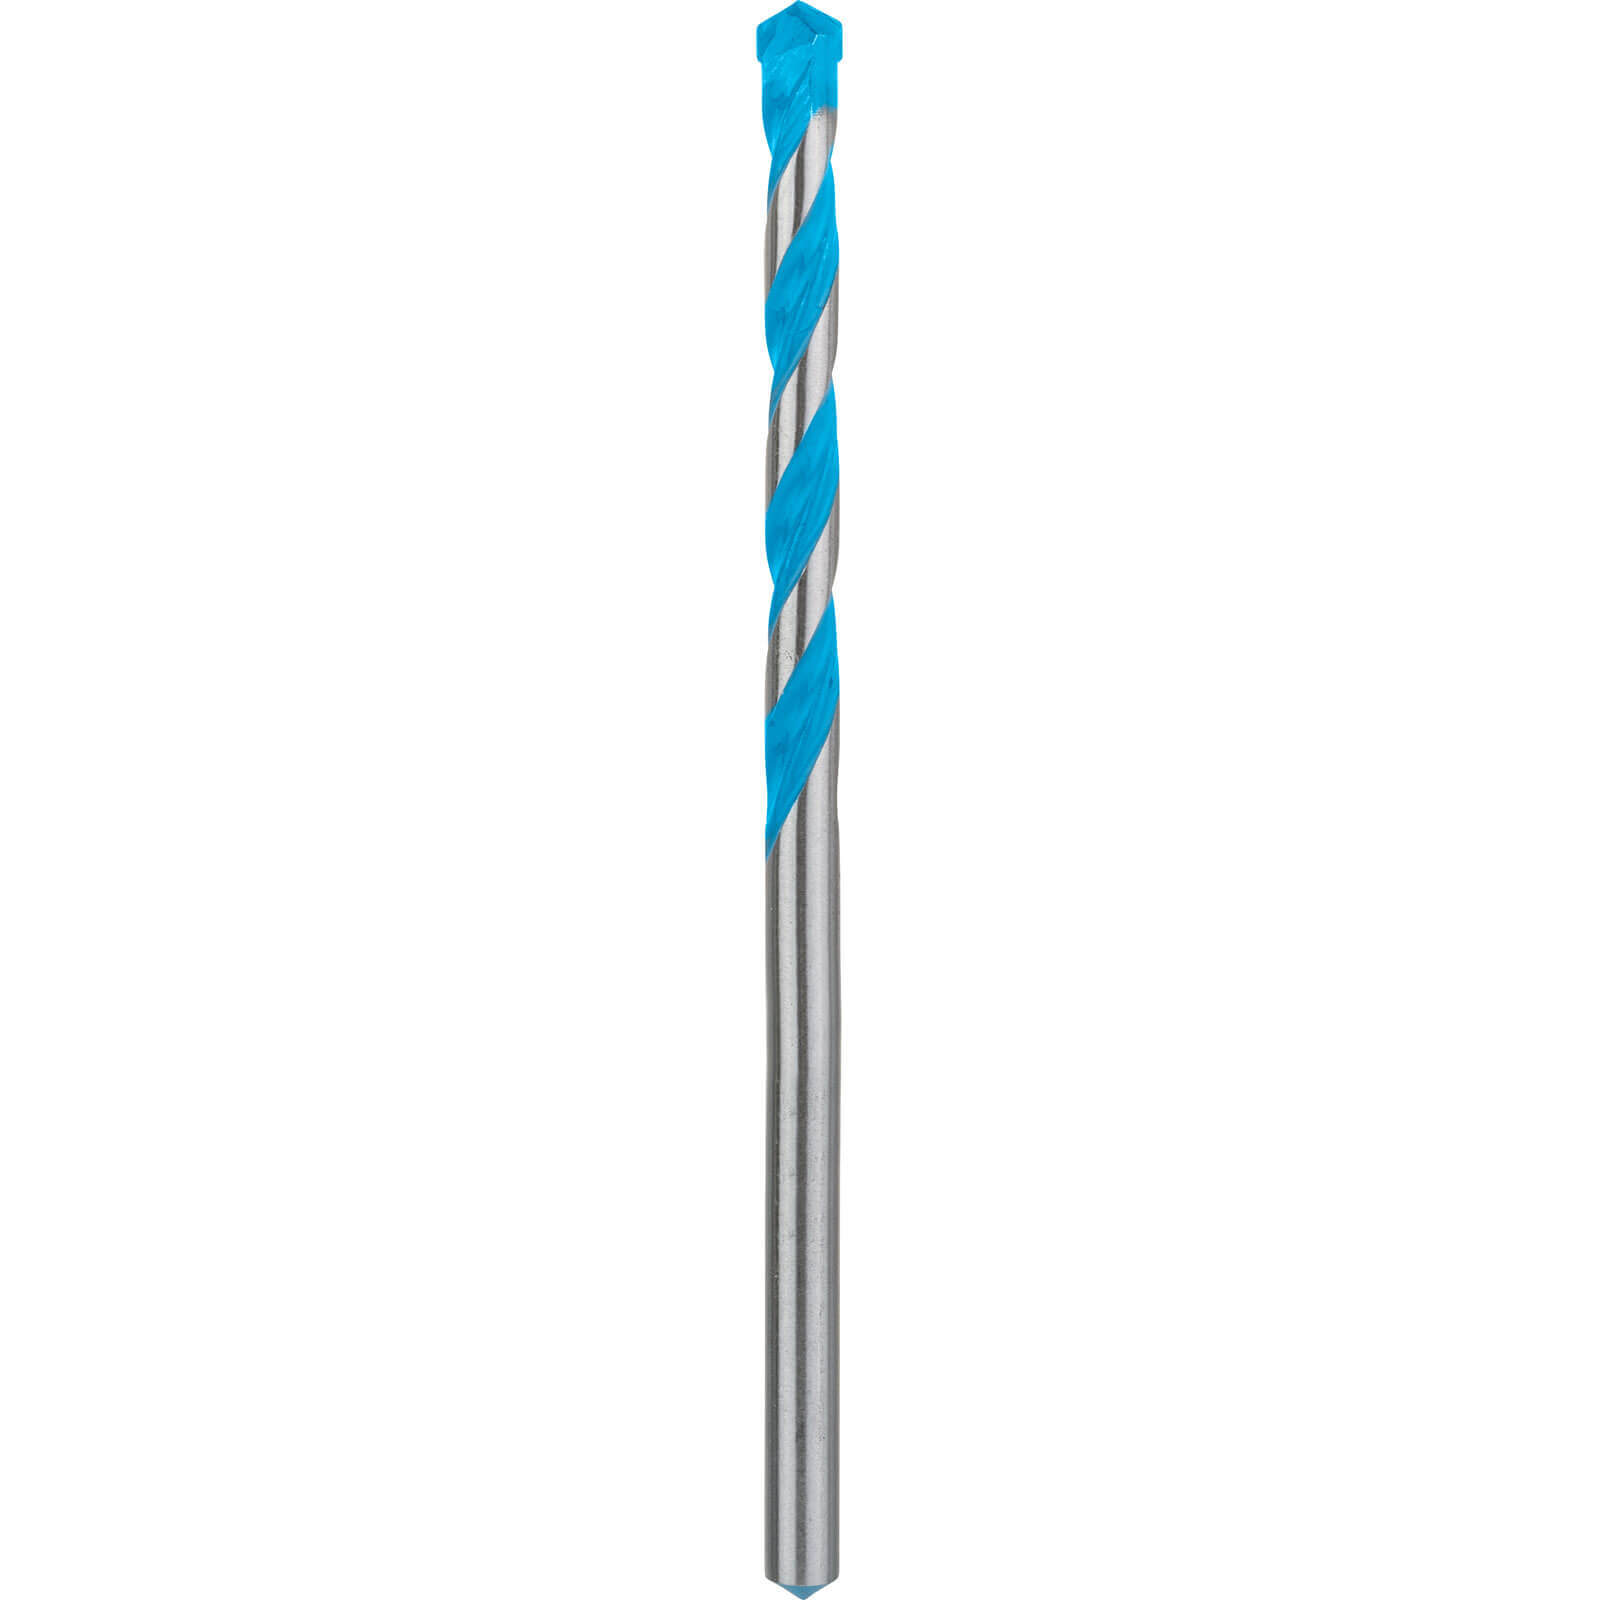 Photo of Bosch Expert Cyl-9 Multi Construction Drill Bit 8mm 150mm Pack Of 1